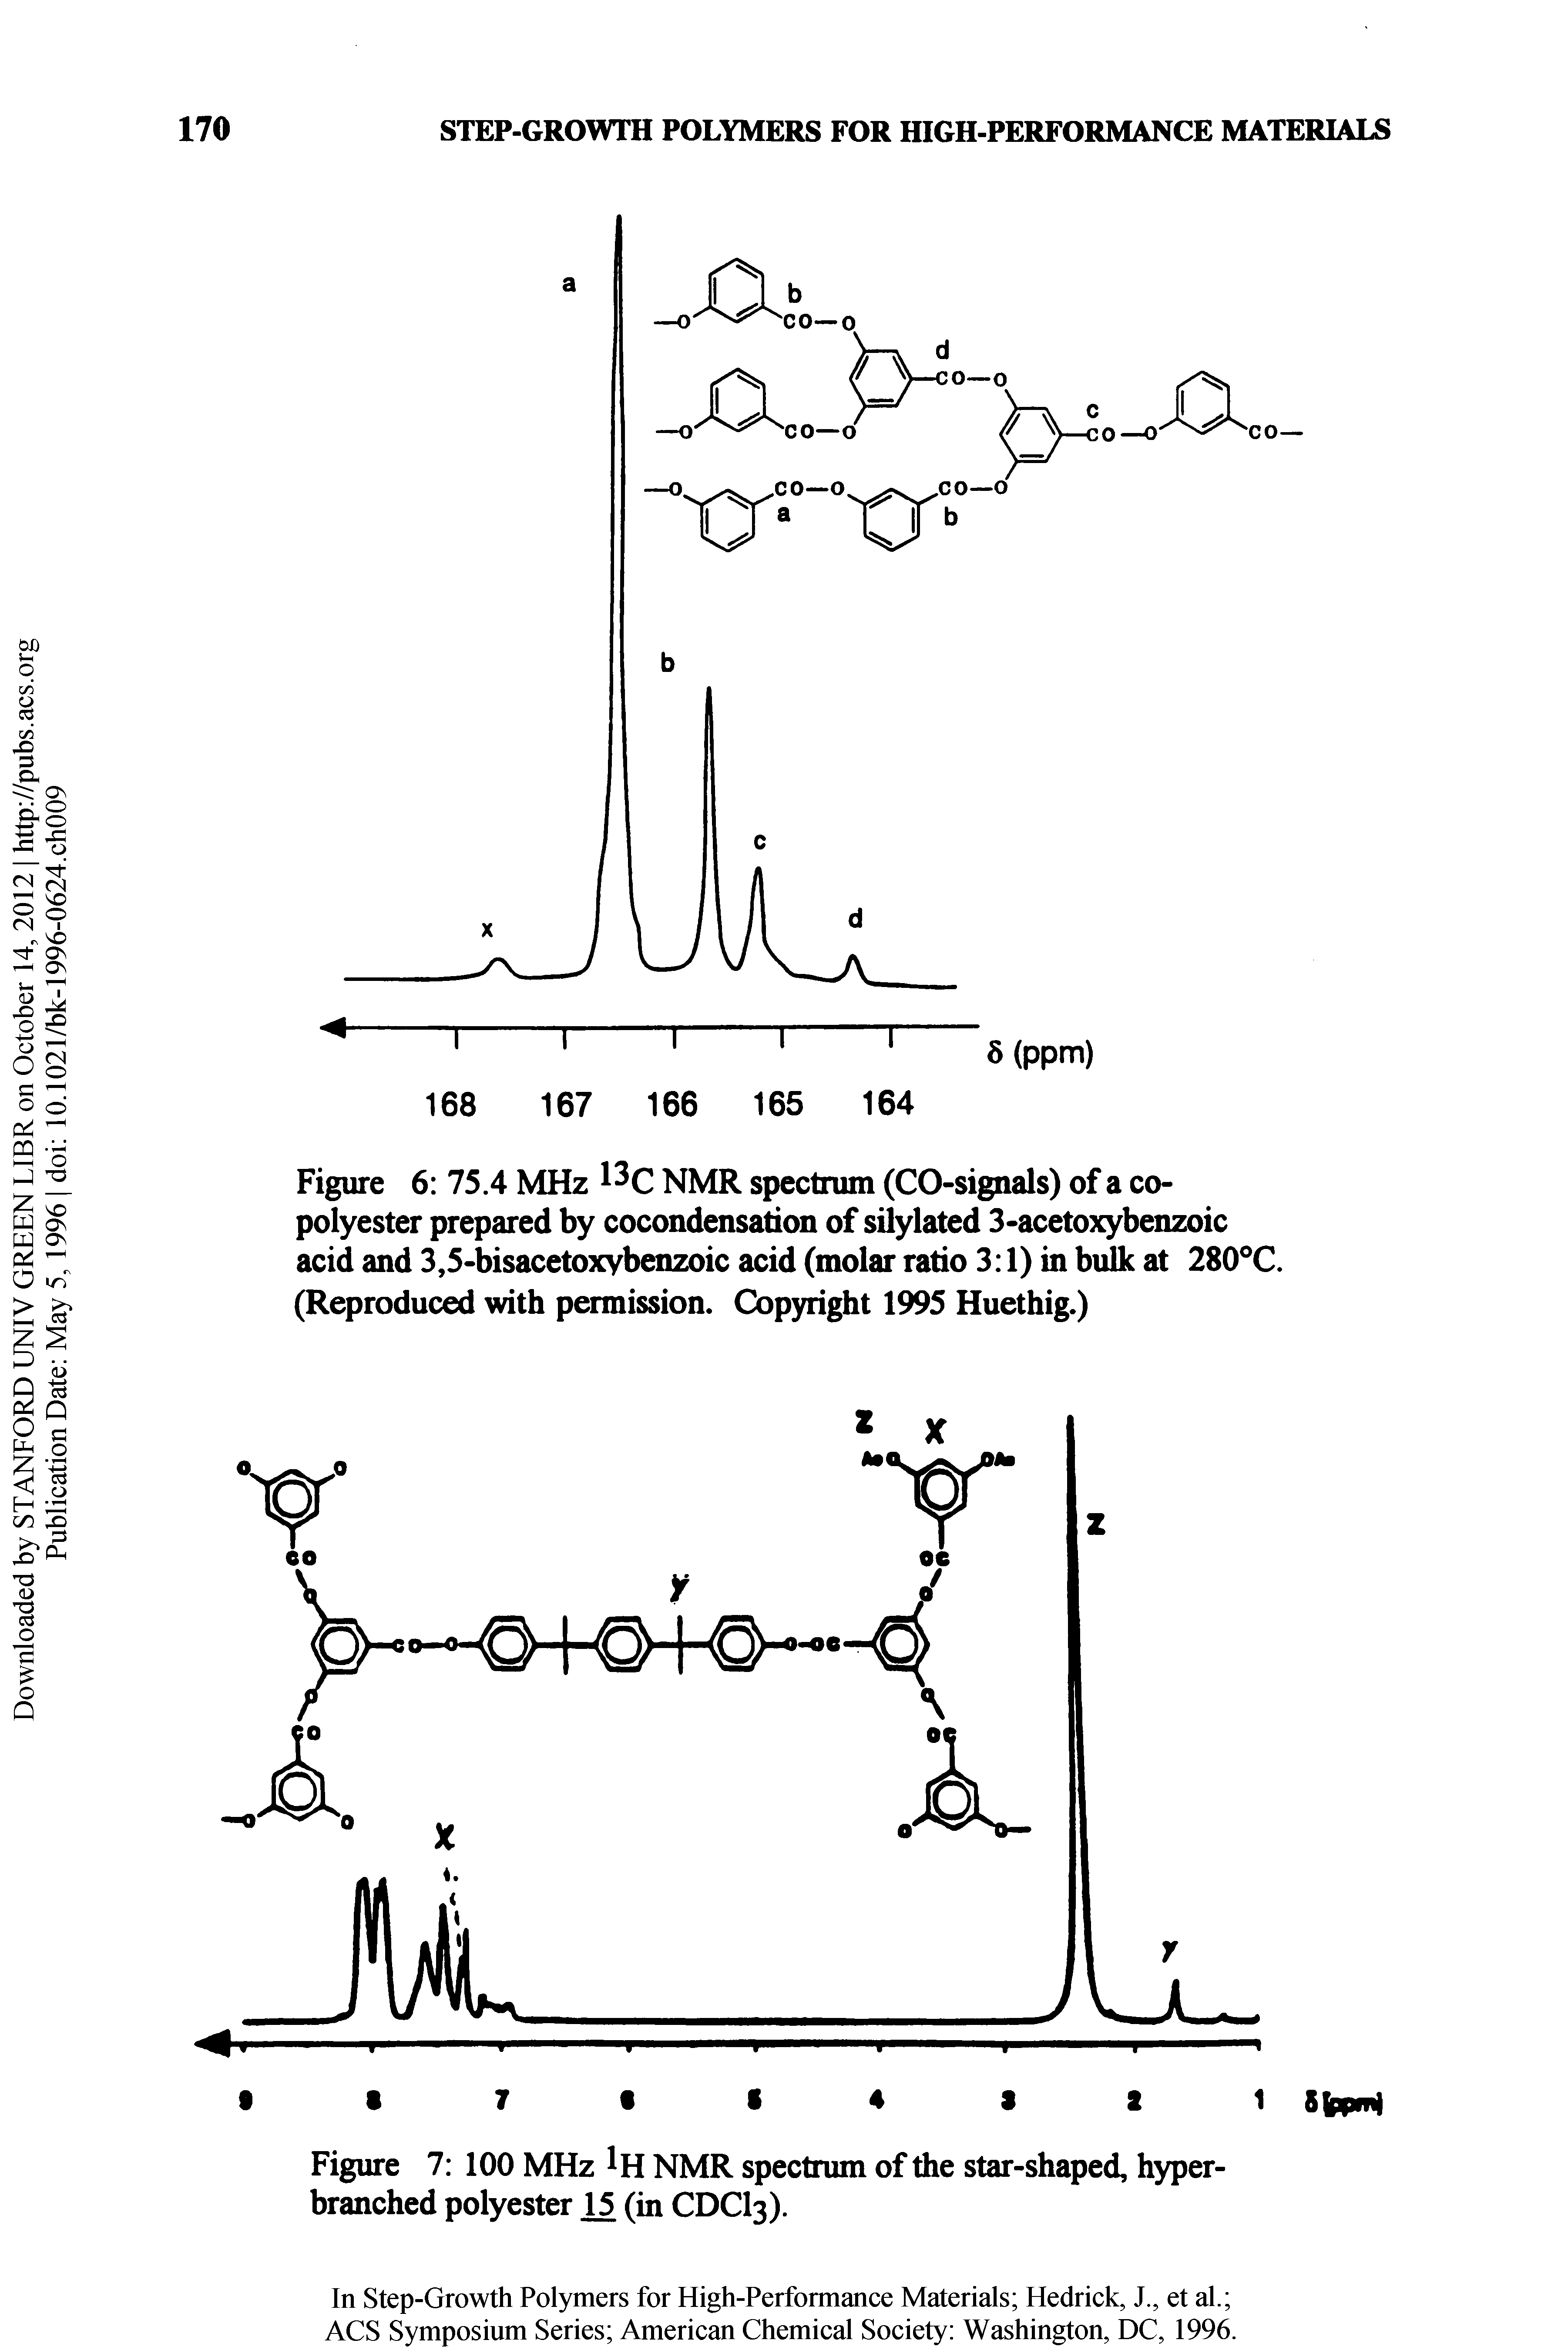 Figure 7 100 MHz 1h NMR spectrum of the star-shaped, hyper-branched polyester 15 (in CDCI3).